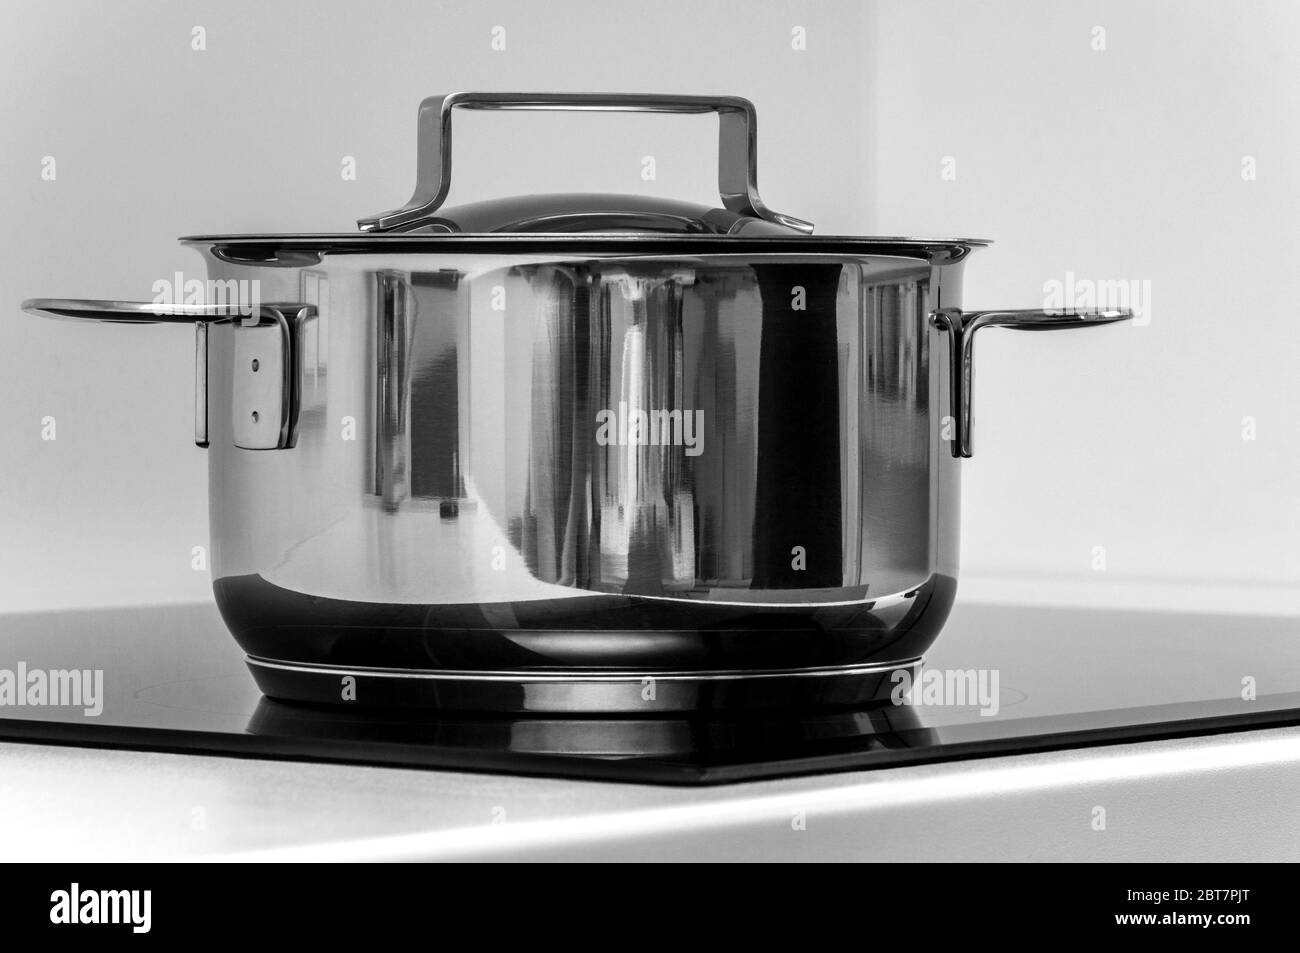 Metal cooking pot on the black induction stove with white background Stock Photo